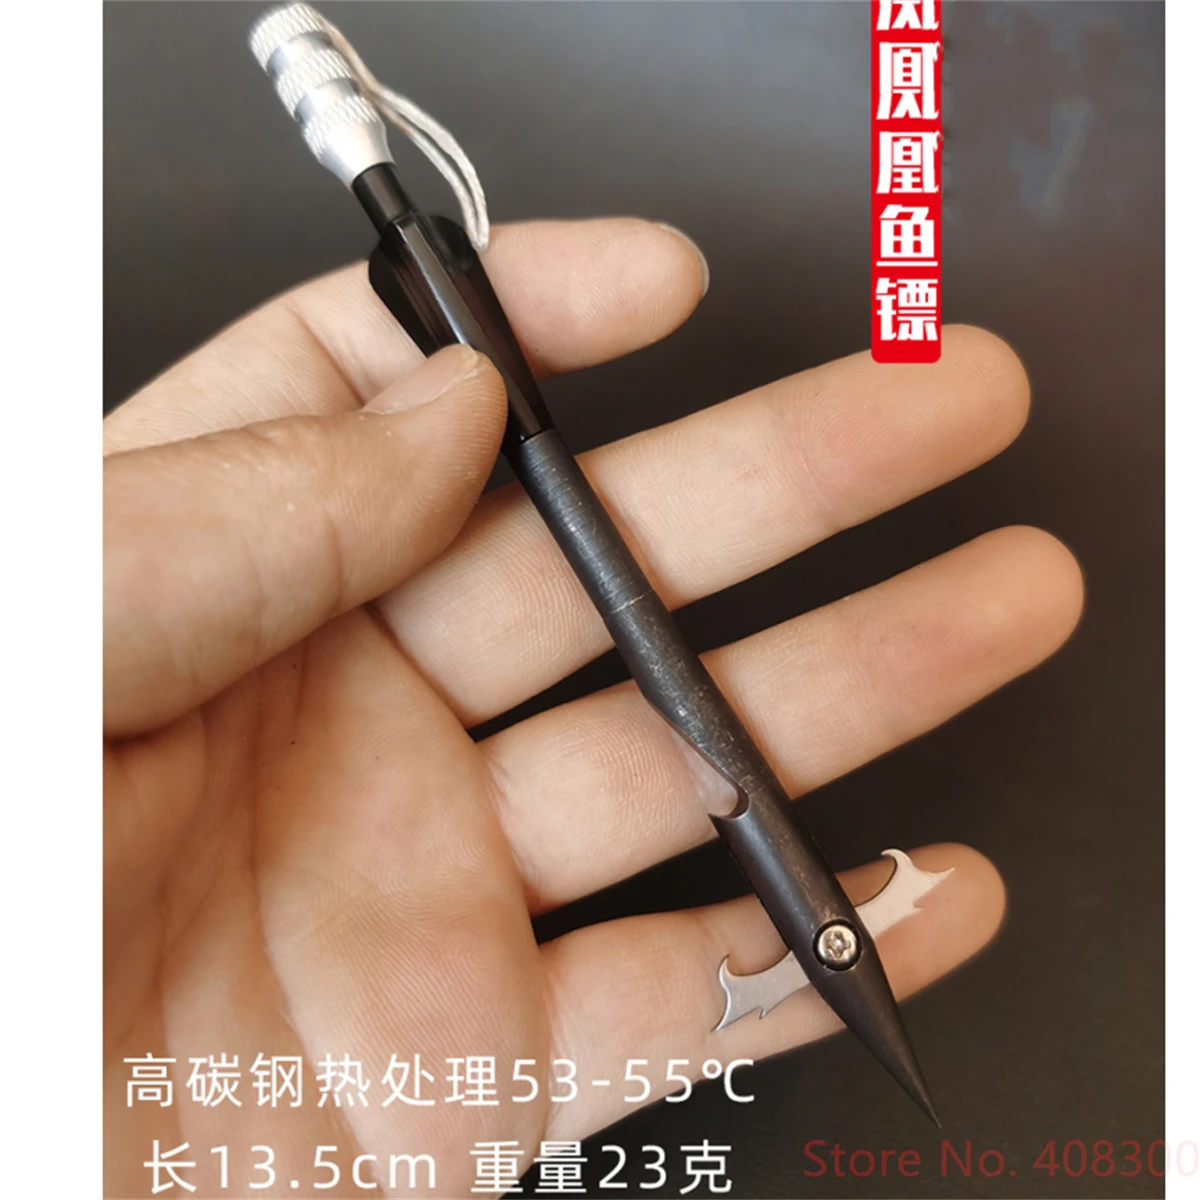 Powerful Deep Water Fish Darts Fishing Arrows for Slingshot Catapult  Crossbow Hunt Shooting Powerful High-carbon steel Archery